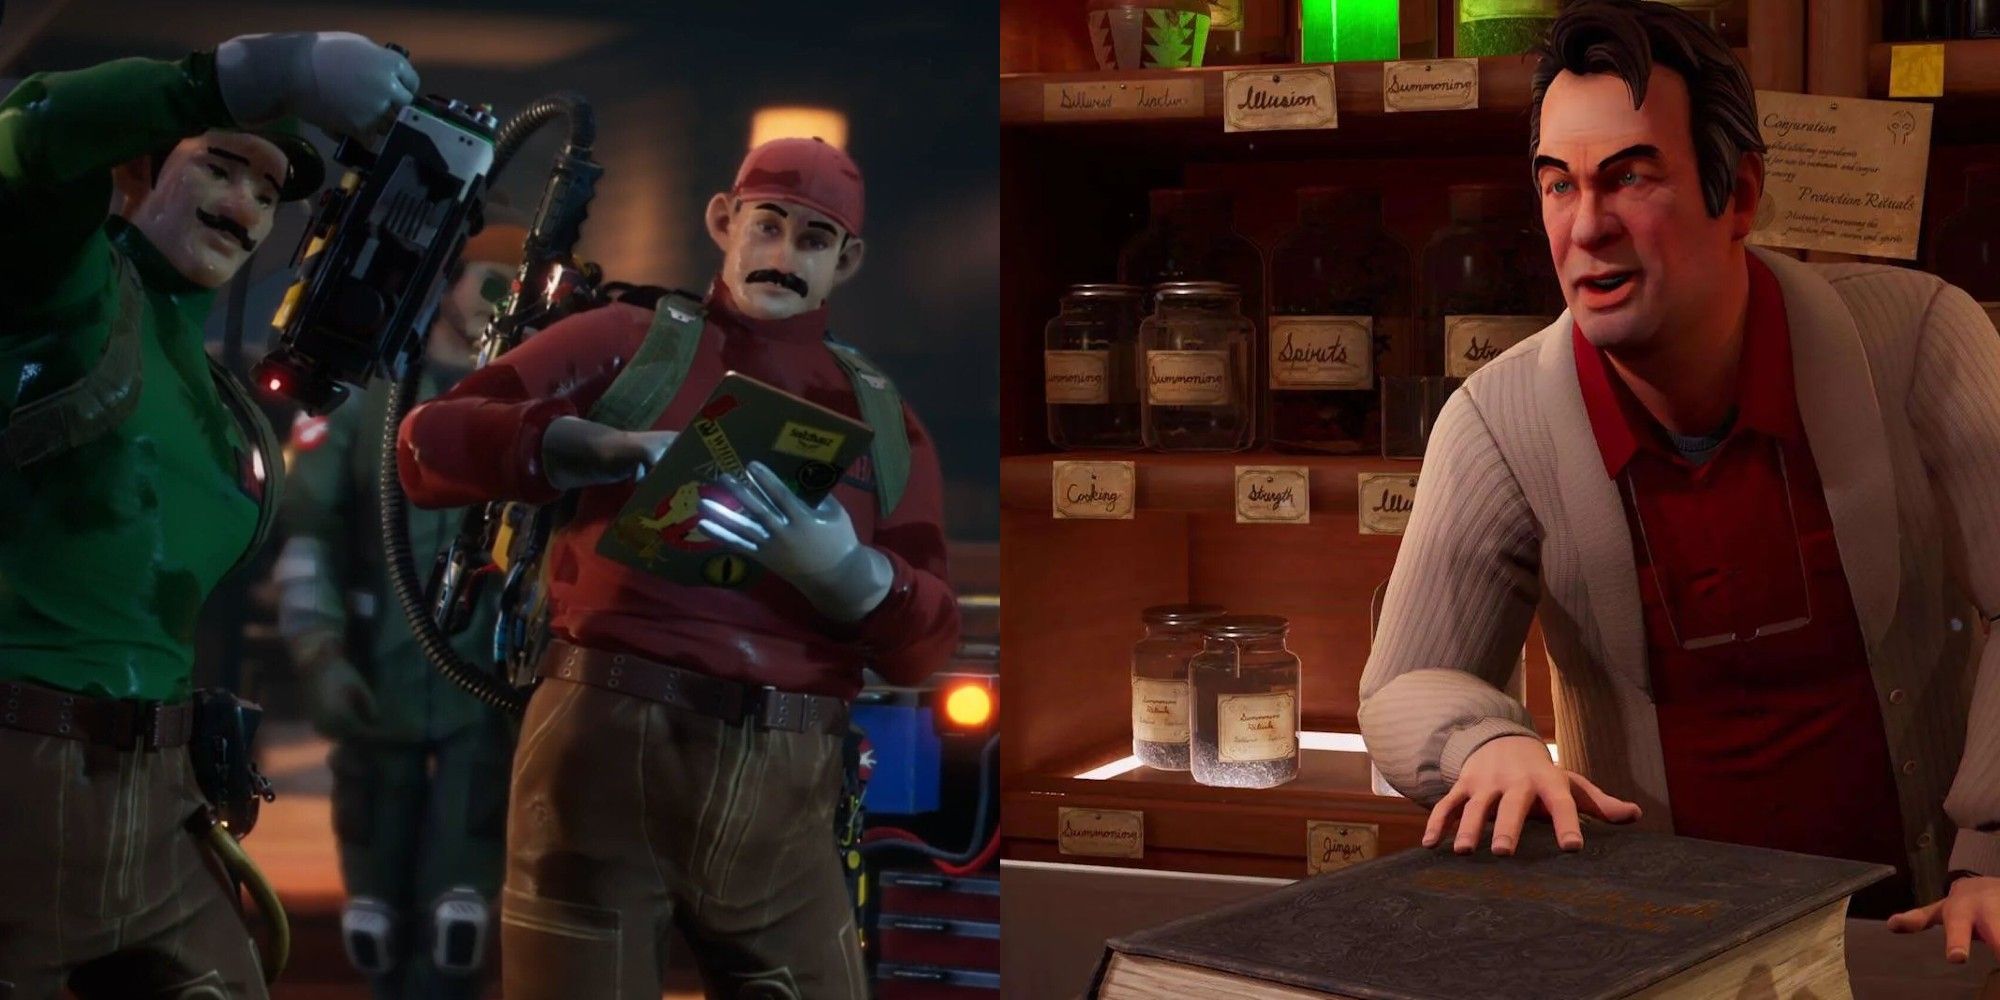 Ghostbusters-Spirits-Unleashed Split Image with mario and luigi custom characters on the left and Ray, an original ghostbuster, on the right.